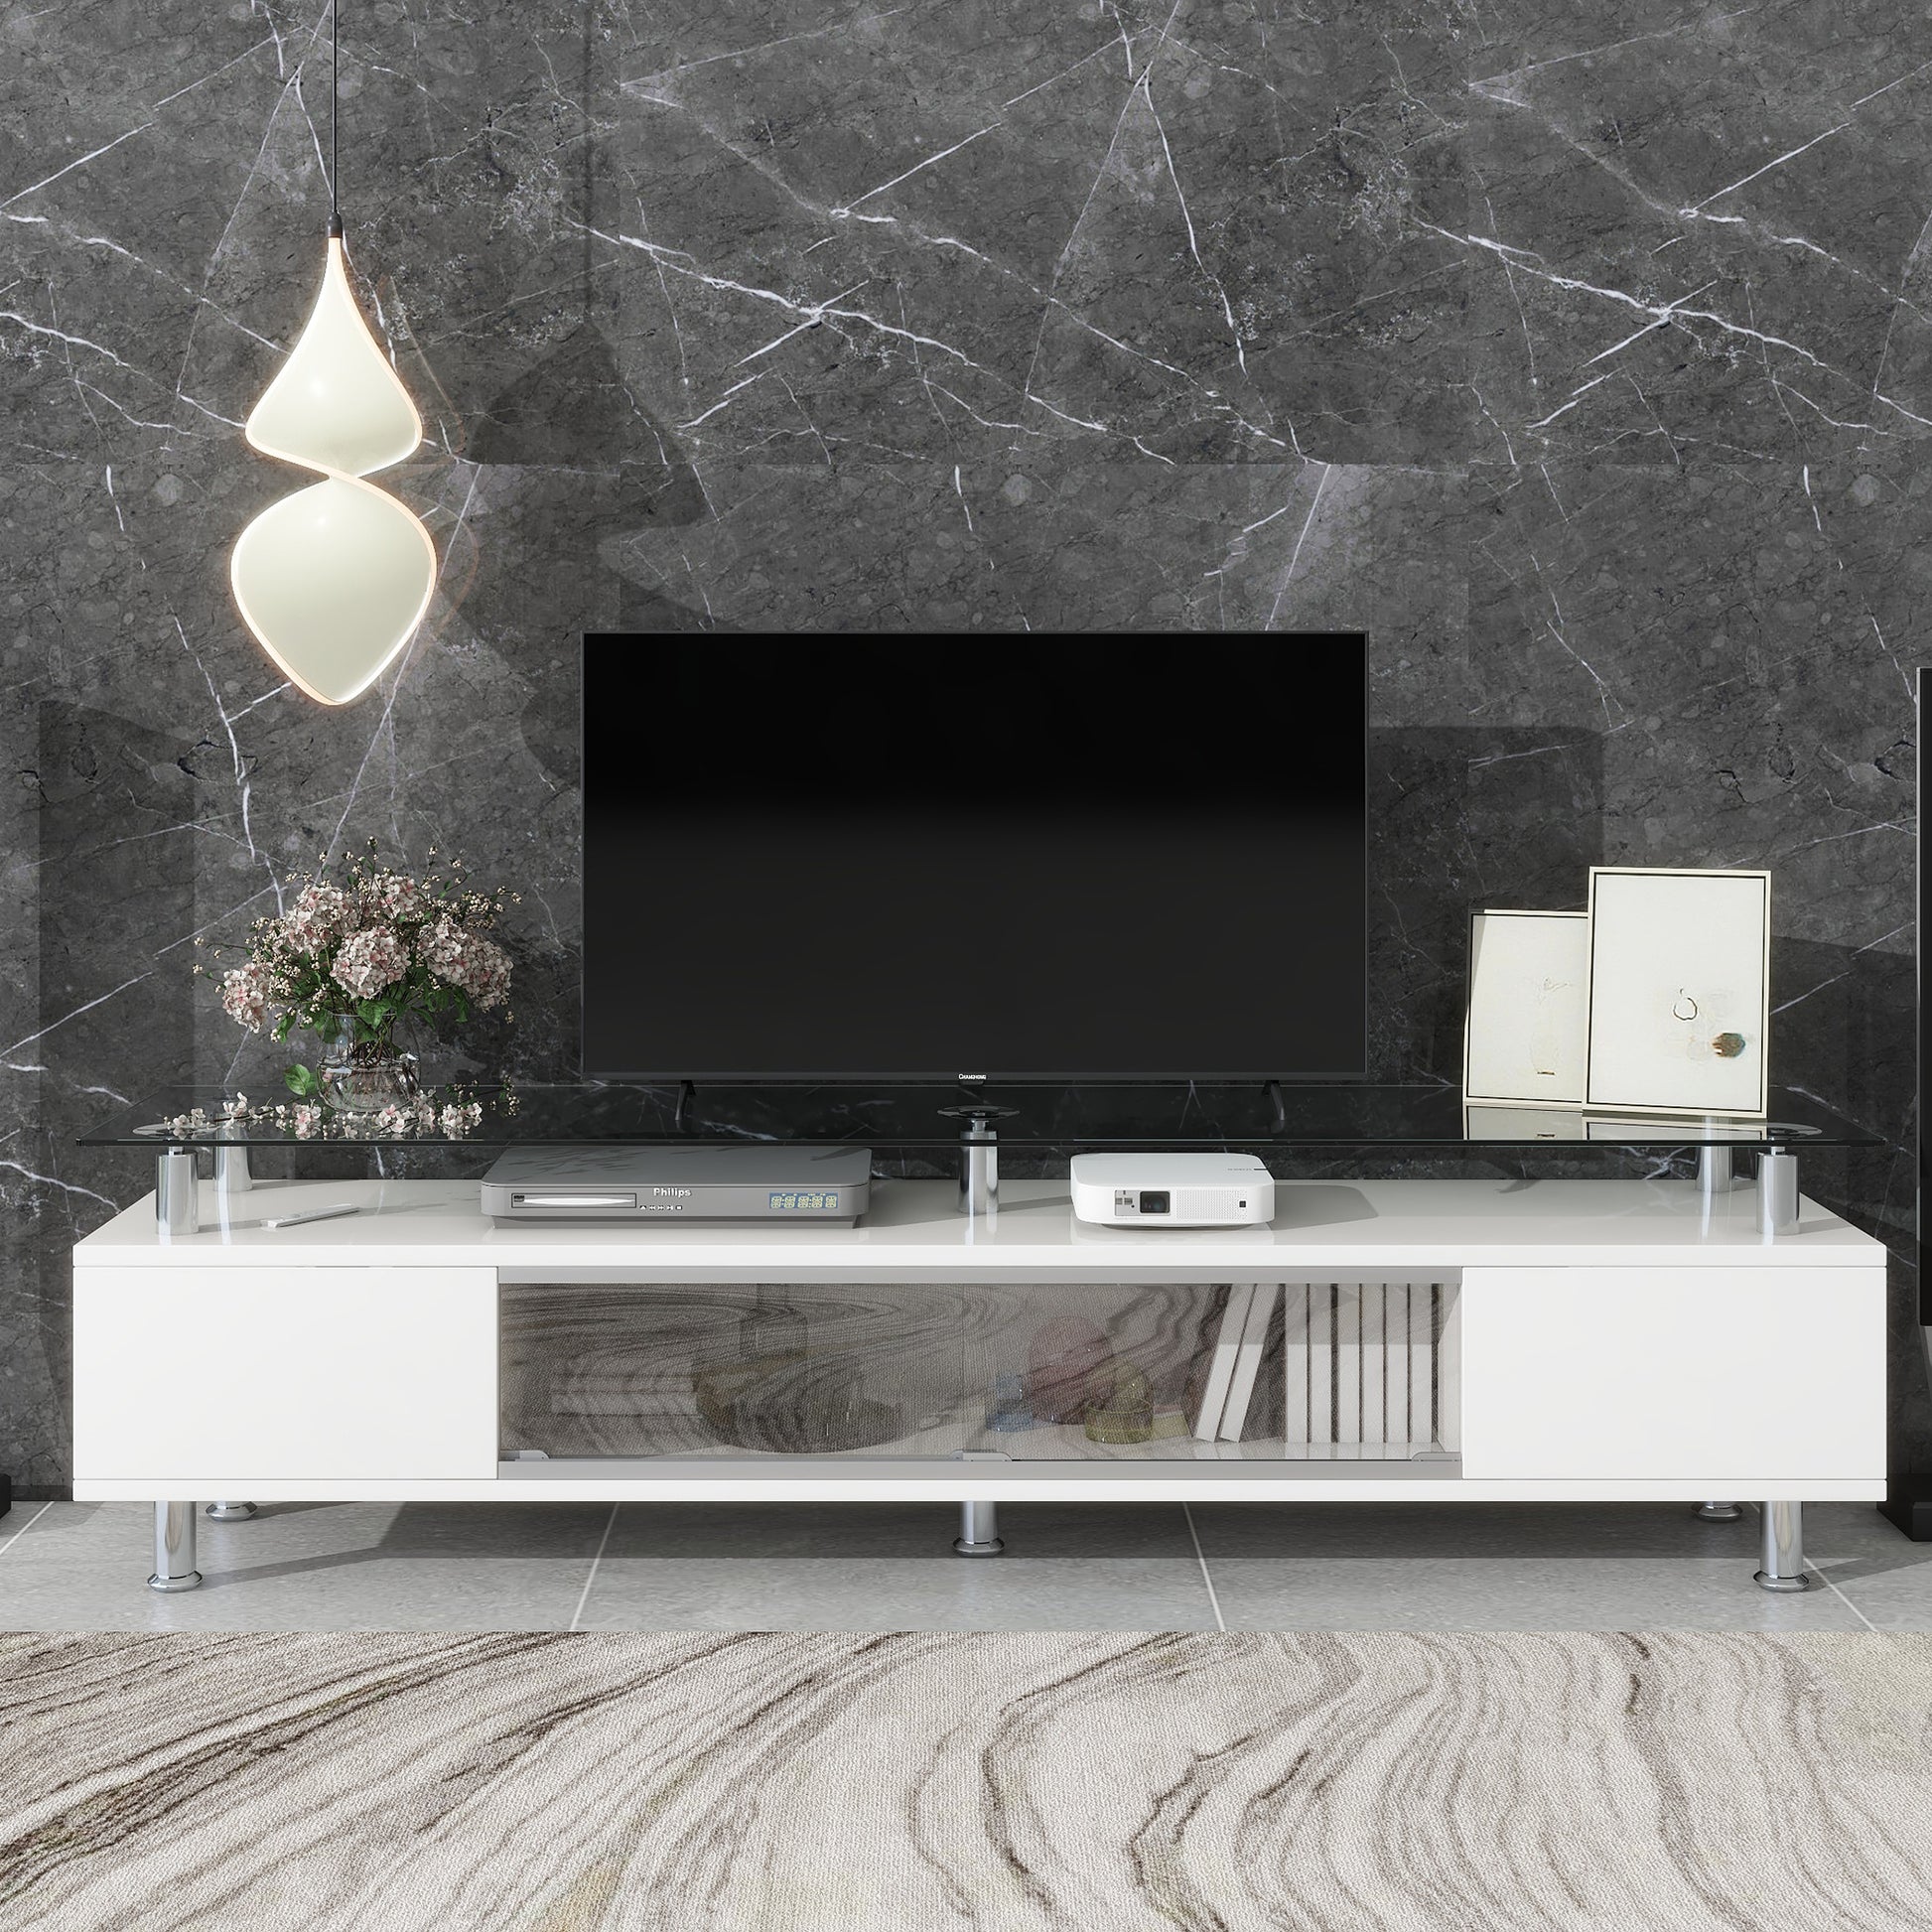 ON-TREND Sleek Design TV Stand with Silver Metal Legs for TV Up to 70", Tempered Glass TV Cabinet with Ample Storage Capacity, Contemporary Media Console with Sliding Glass Door for Living Room, White - Enova Luxe Home Store